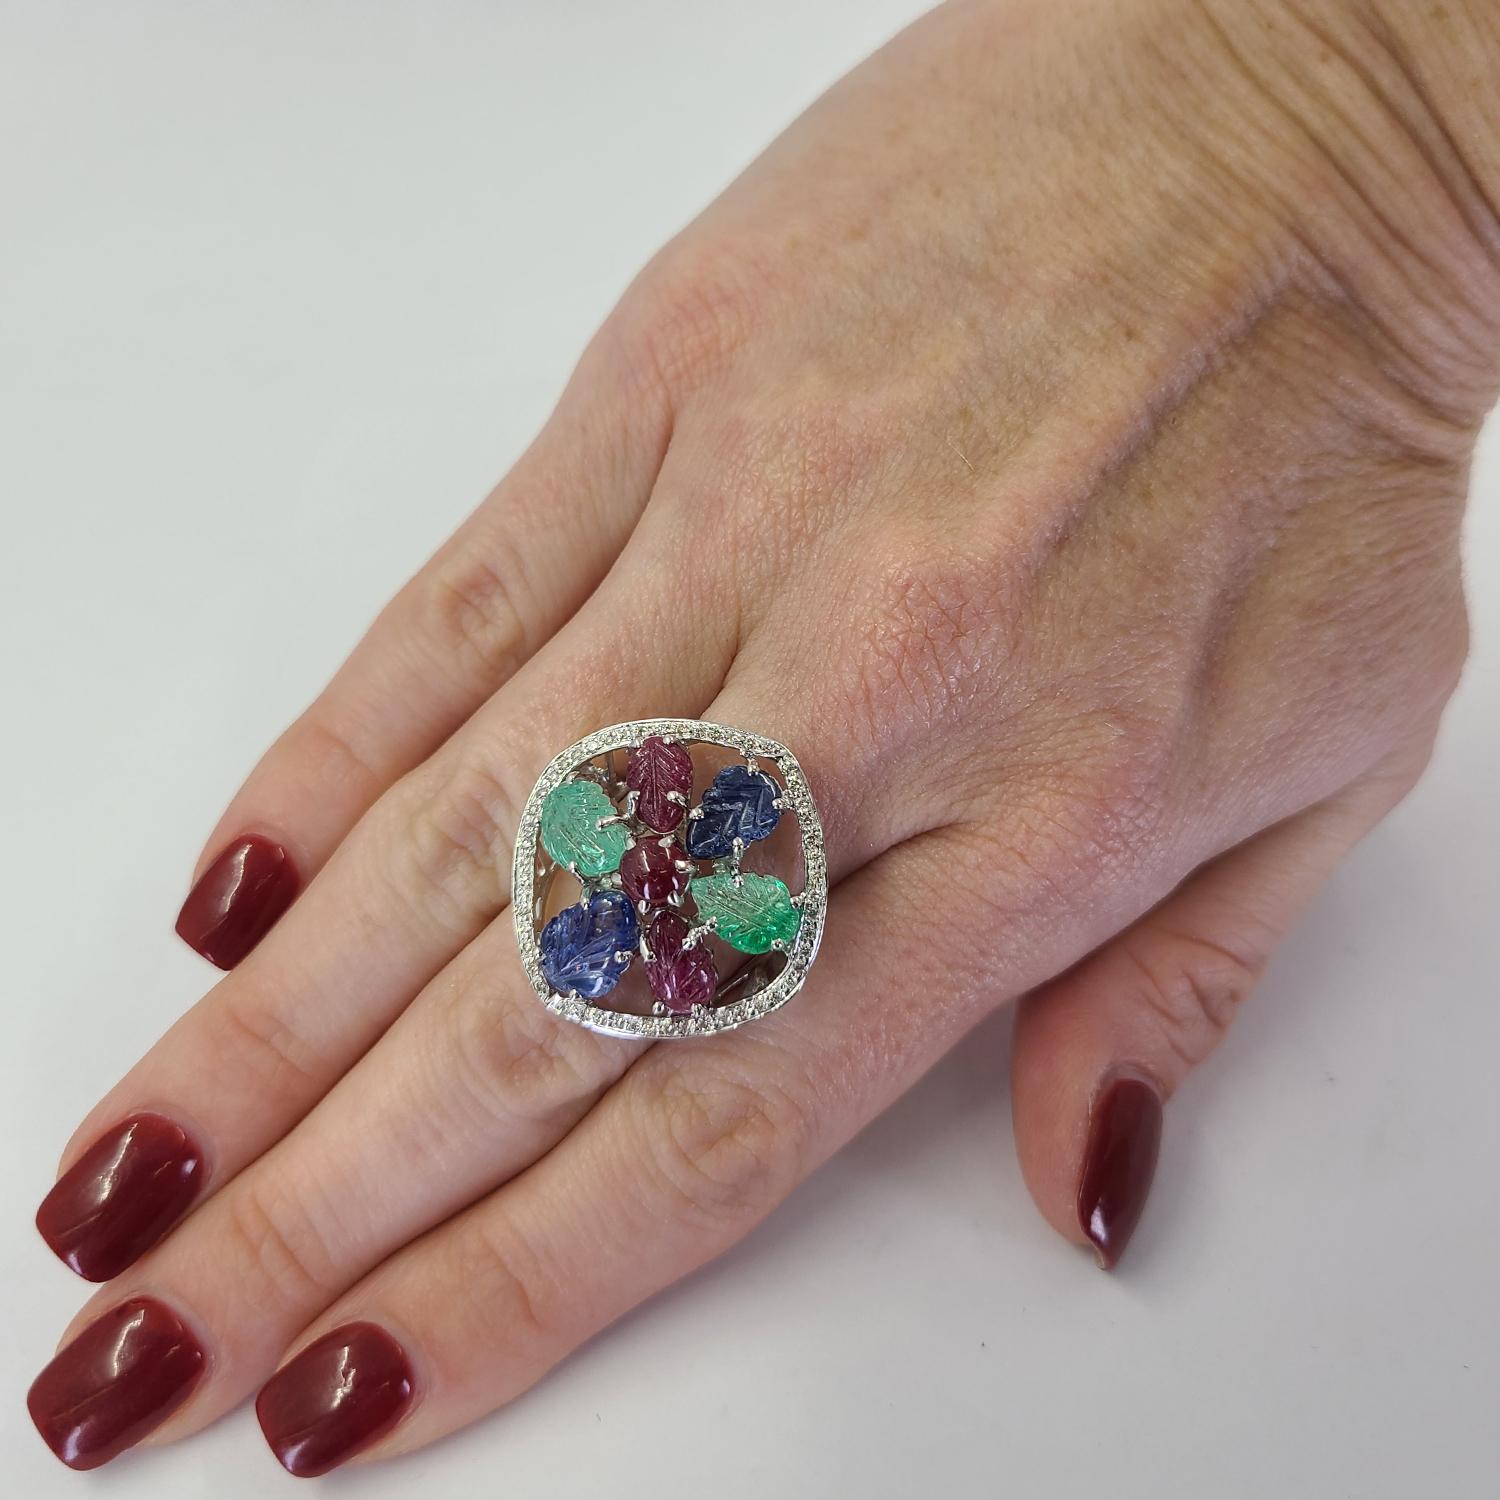 Inspired by Indian royalty, this 18 Karat White Gold Tutti Frutti Style Ring Features Carved Emerald, Ruby, & Sapphires Accented By 50 Round Brilliant Diamonds Totaling 0.25 Carats. Finger Size 7; Purchase Includes One Sizing Service. Finished